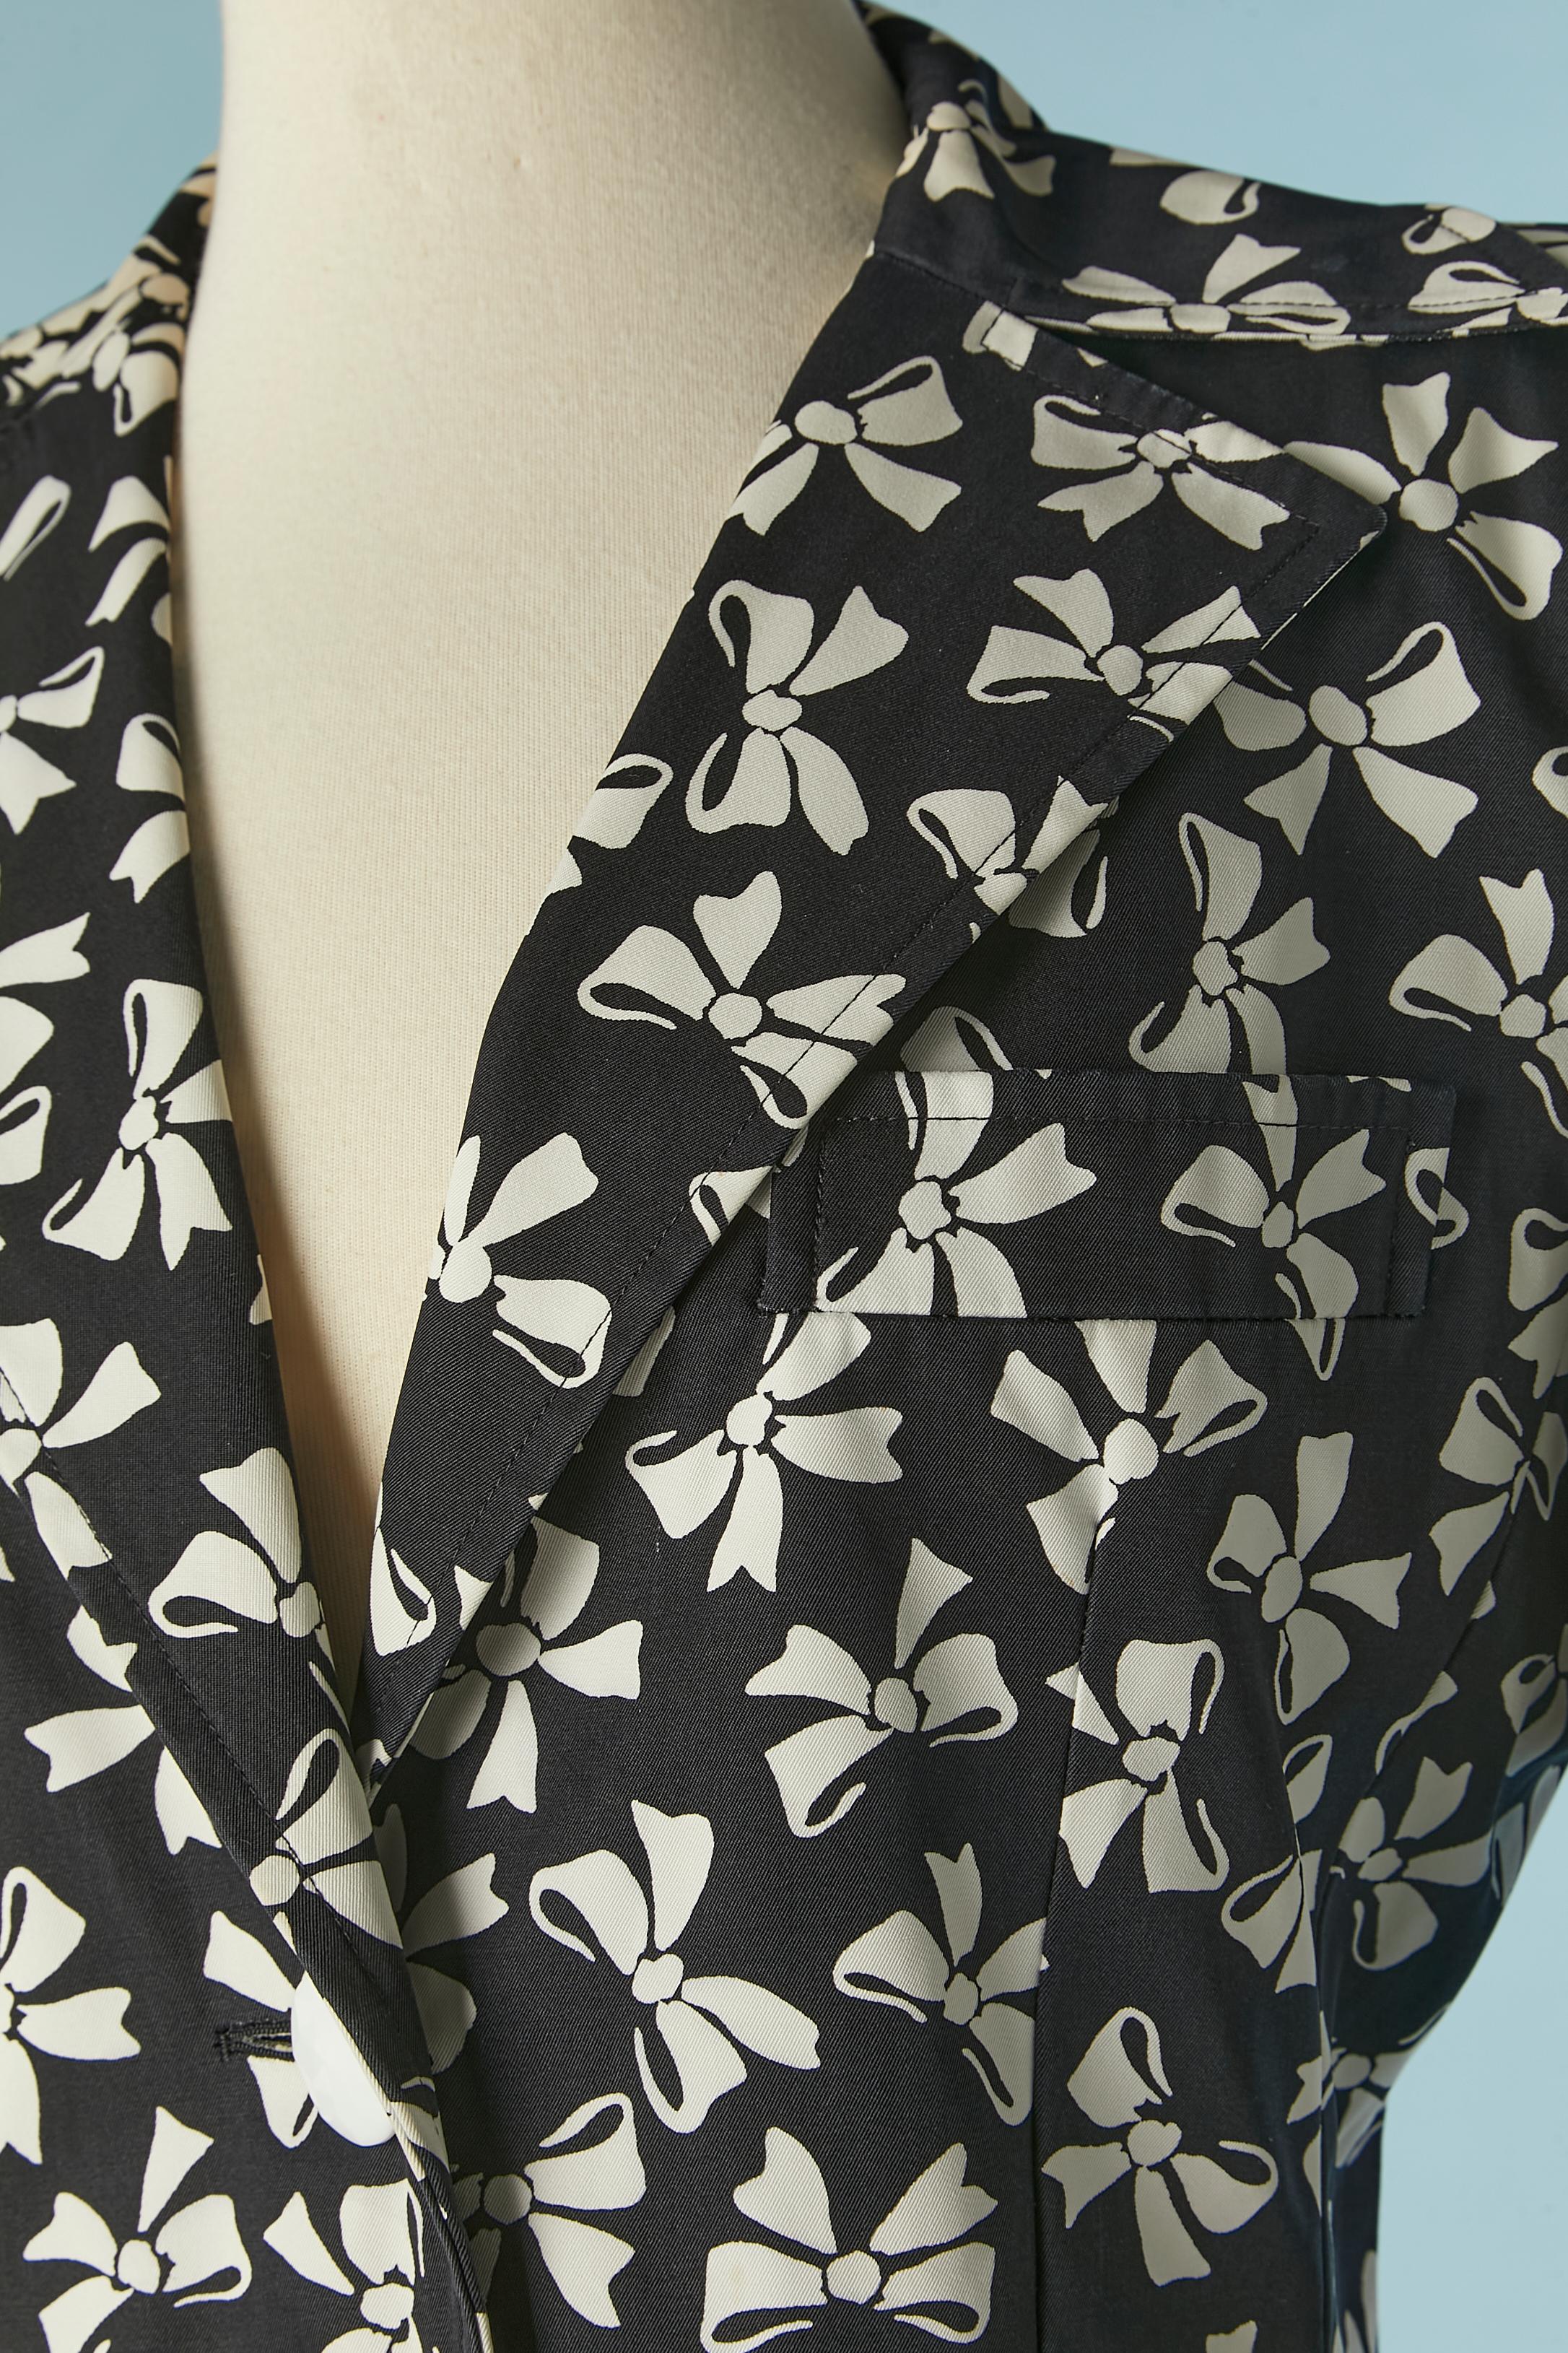 Black and white skirt-suit with bow print. Main fabric: 100% cotton, lining: 55% acetate, 45% rayon. 
Shoulder-pad. Pocket on both side and one pocket on the top side on the bust. 
SIZE 38 (Fr) L for the jacket
SIZE 40 (Fr) M for the skirt 